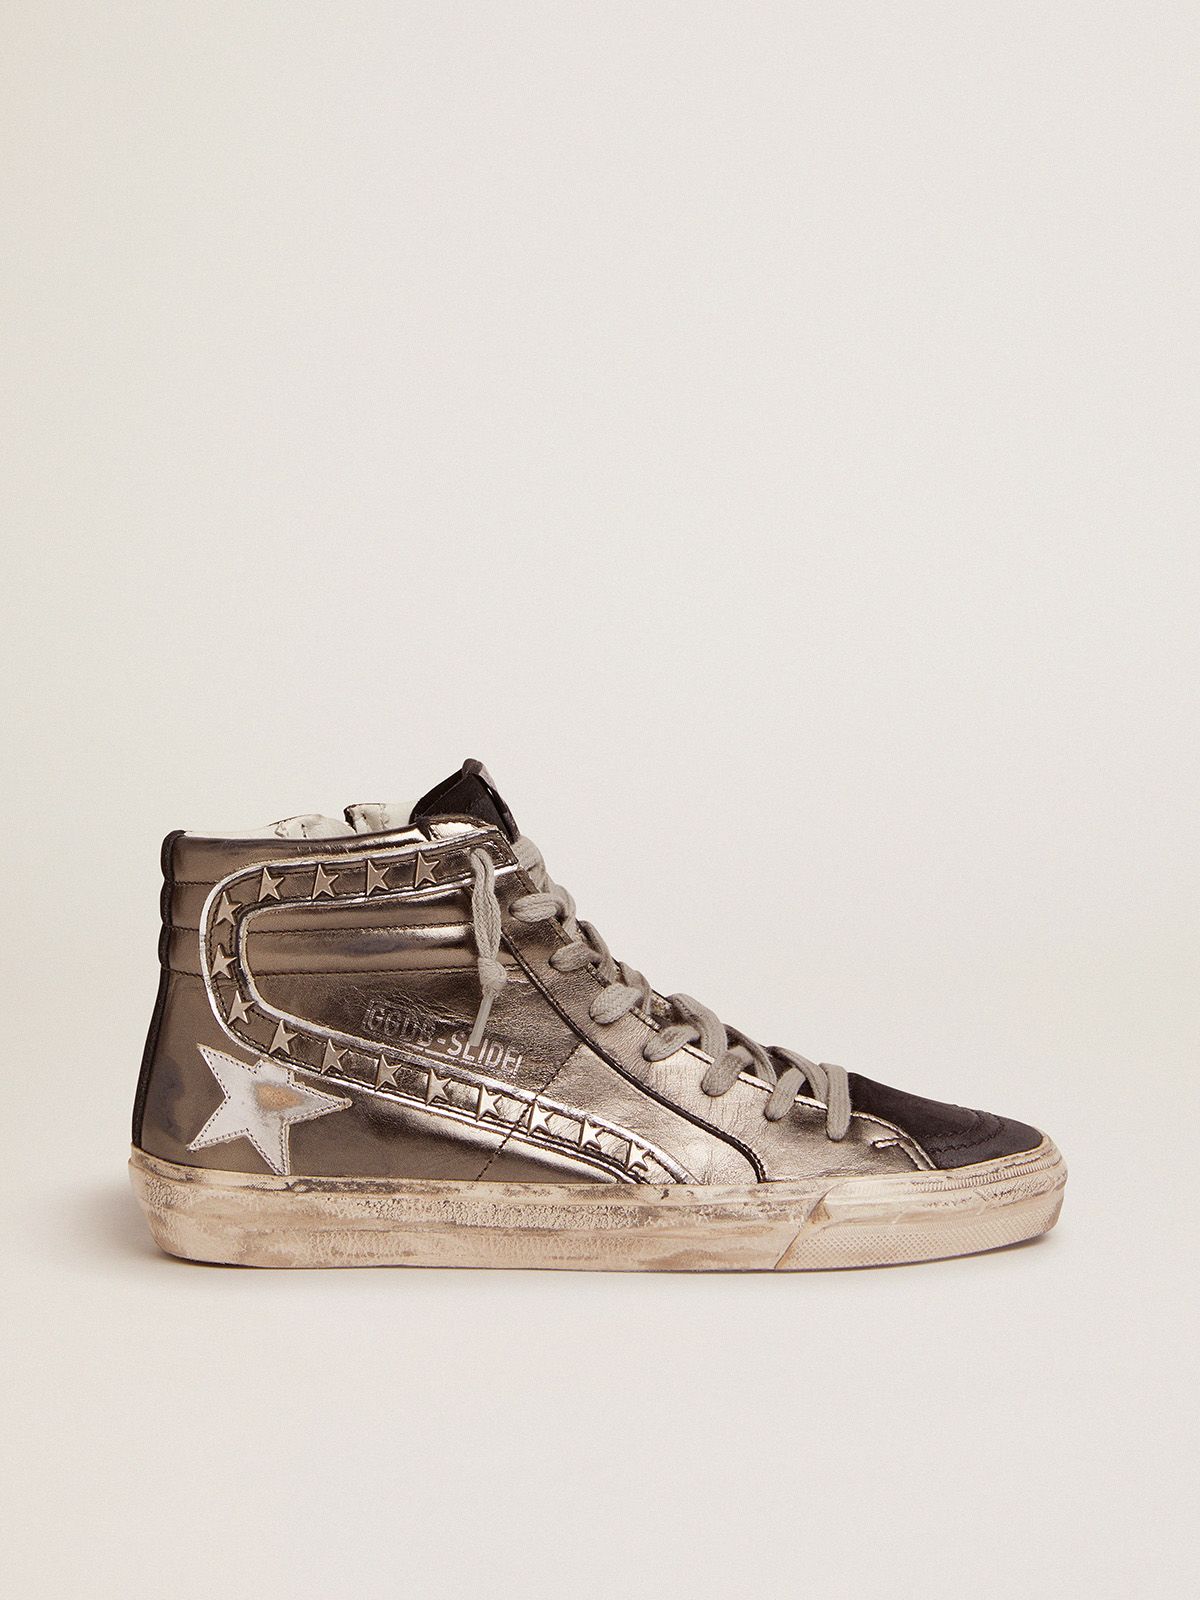 Slide sneakers with silver laminated leather upper and star-shaped studs